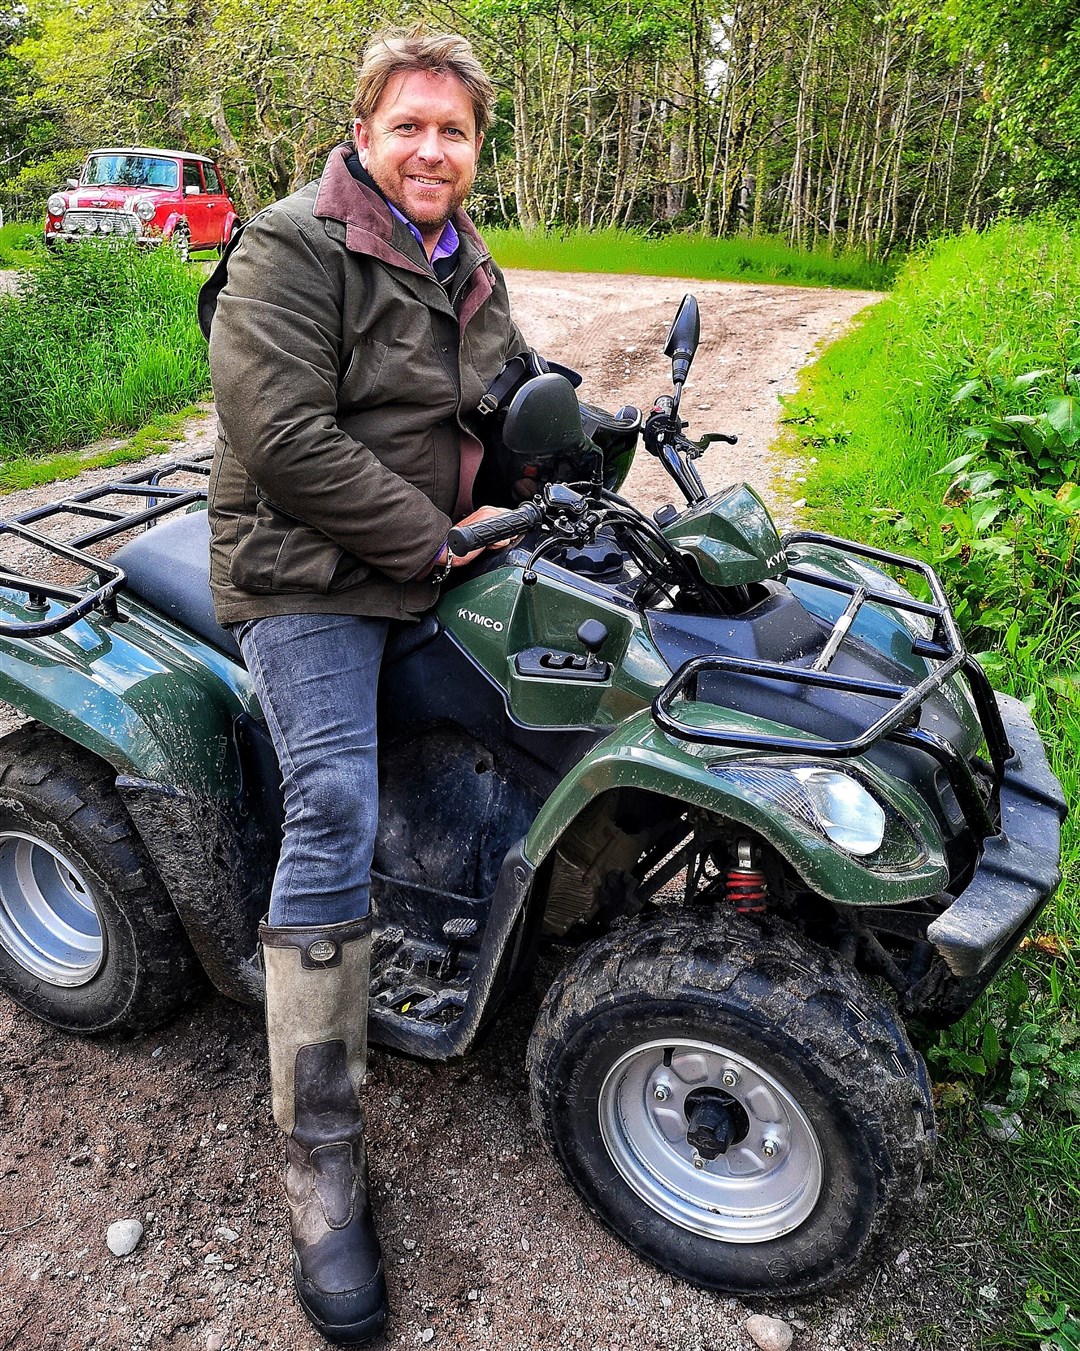 James Martin pictured on his quad biking adventure on Rothiemurchus by Aviemore.